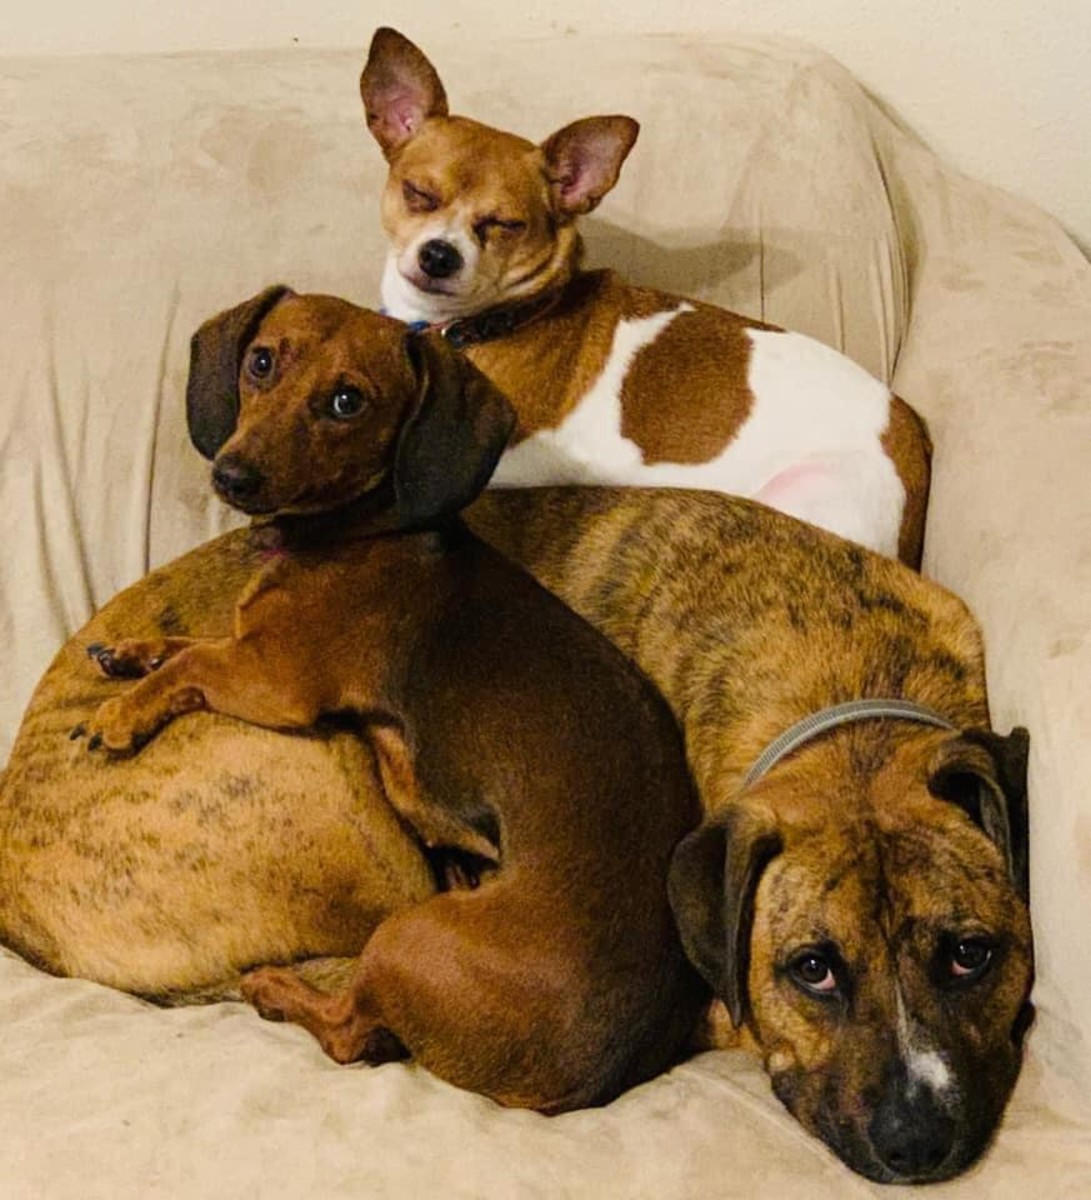 Best buds: It took a lot of time and patience in the beginning, but these three have grown to love each other.